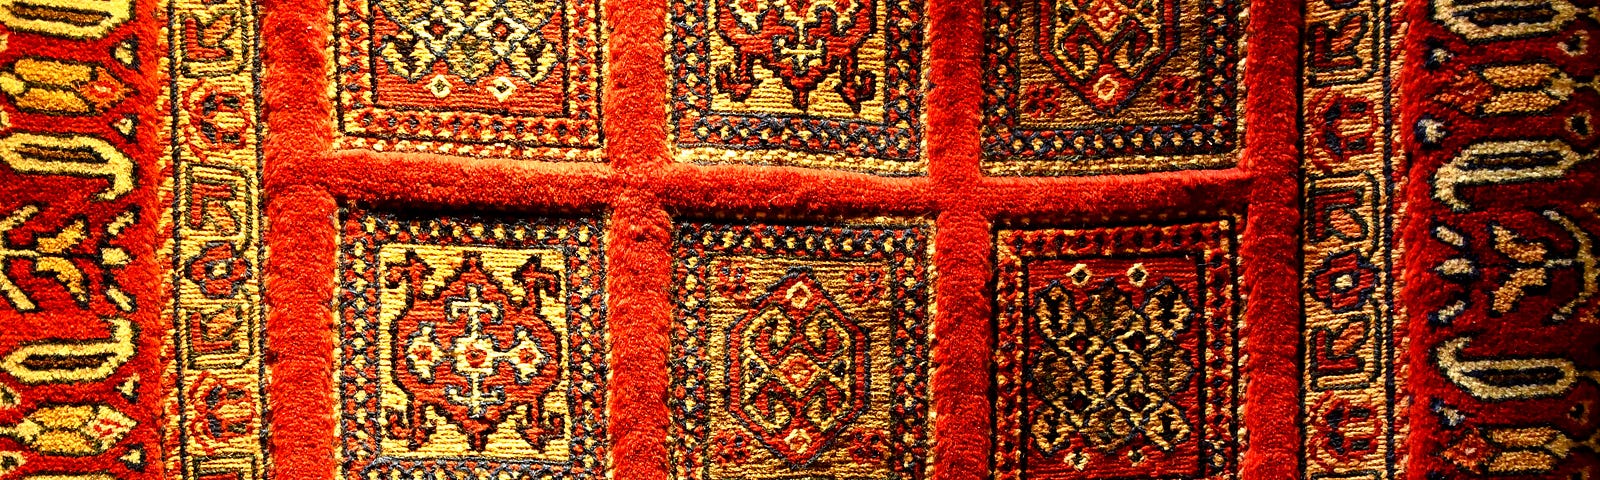 A richly textured Persian carpet